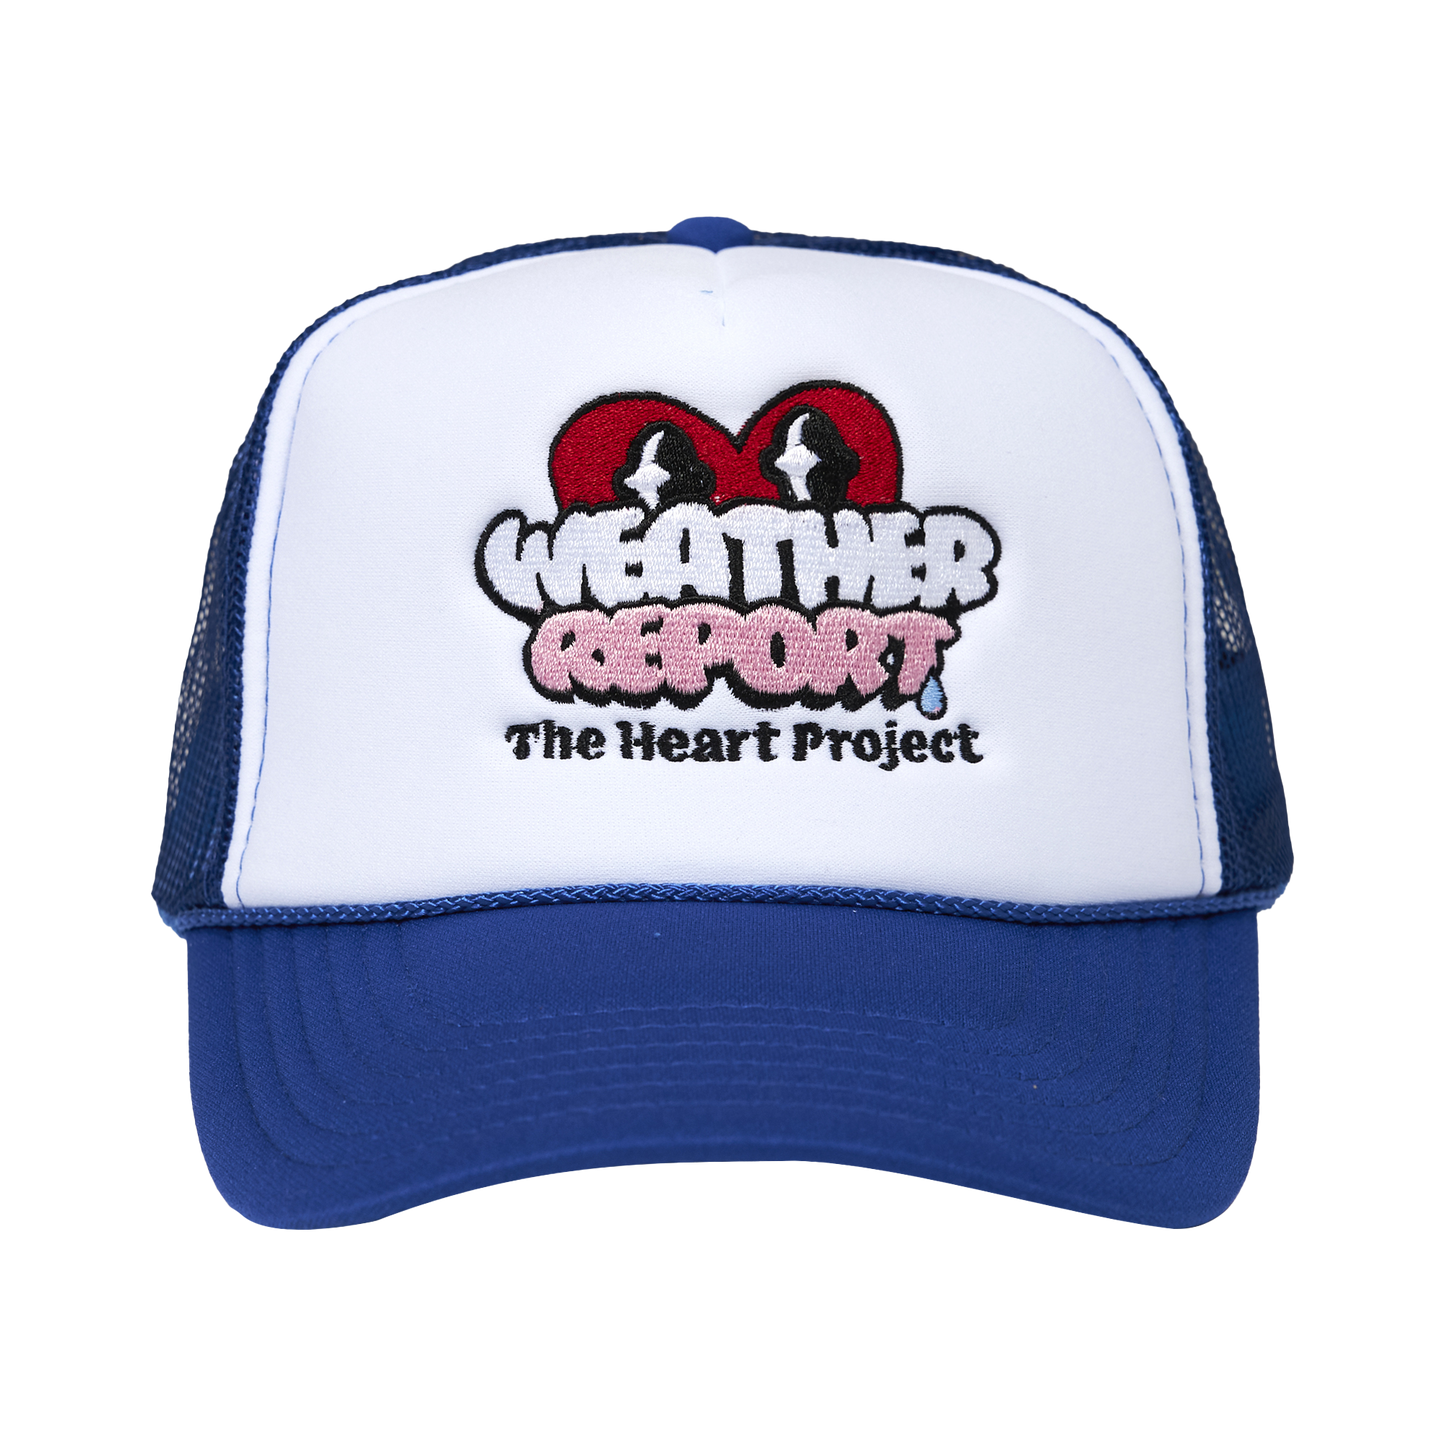 WEATHER REPORT X THE HEART PROJECT - LOVE HAT